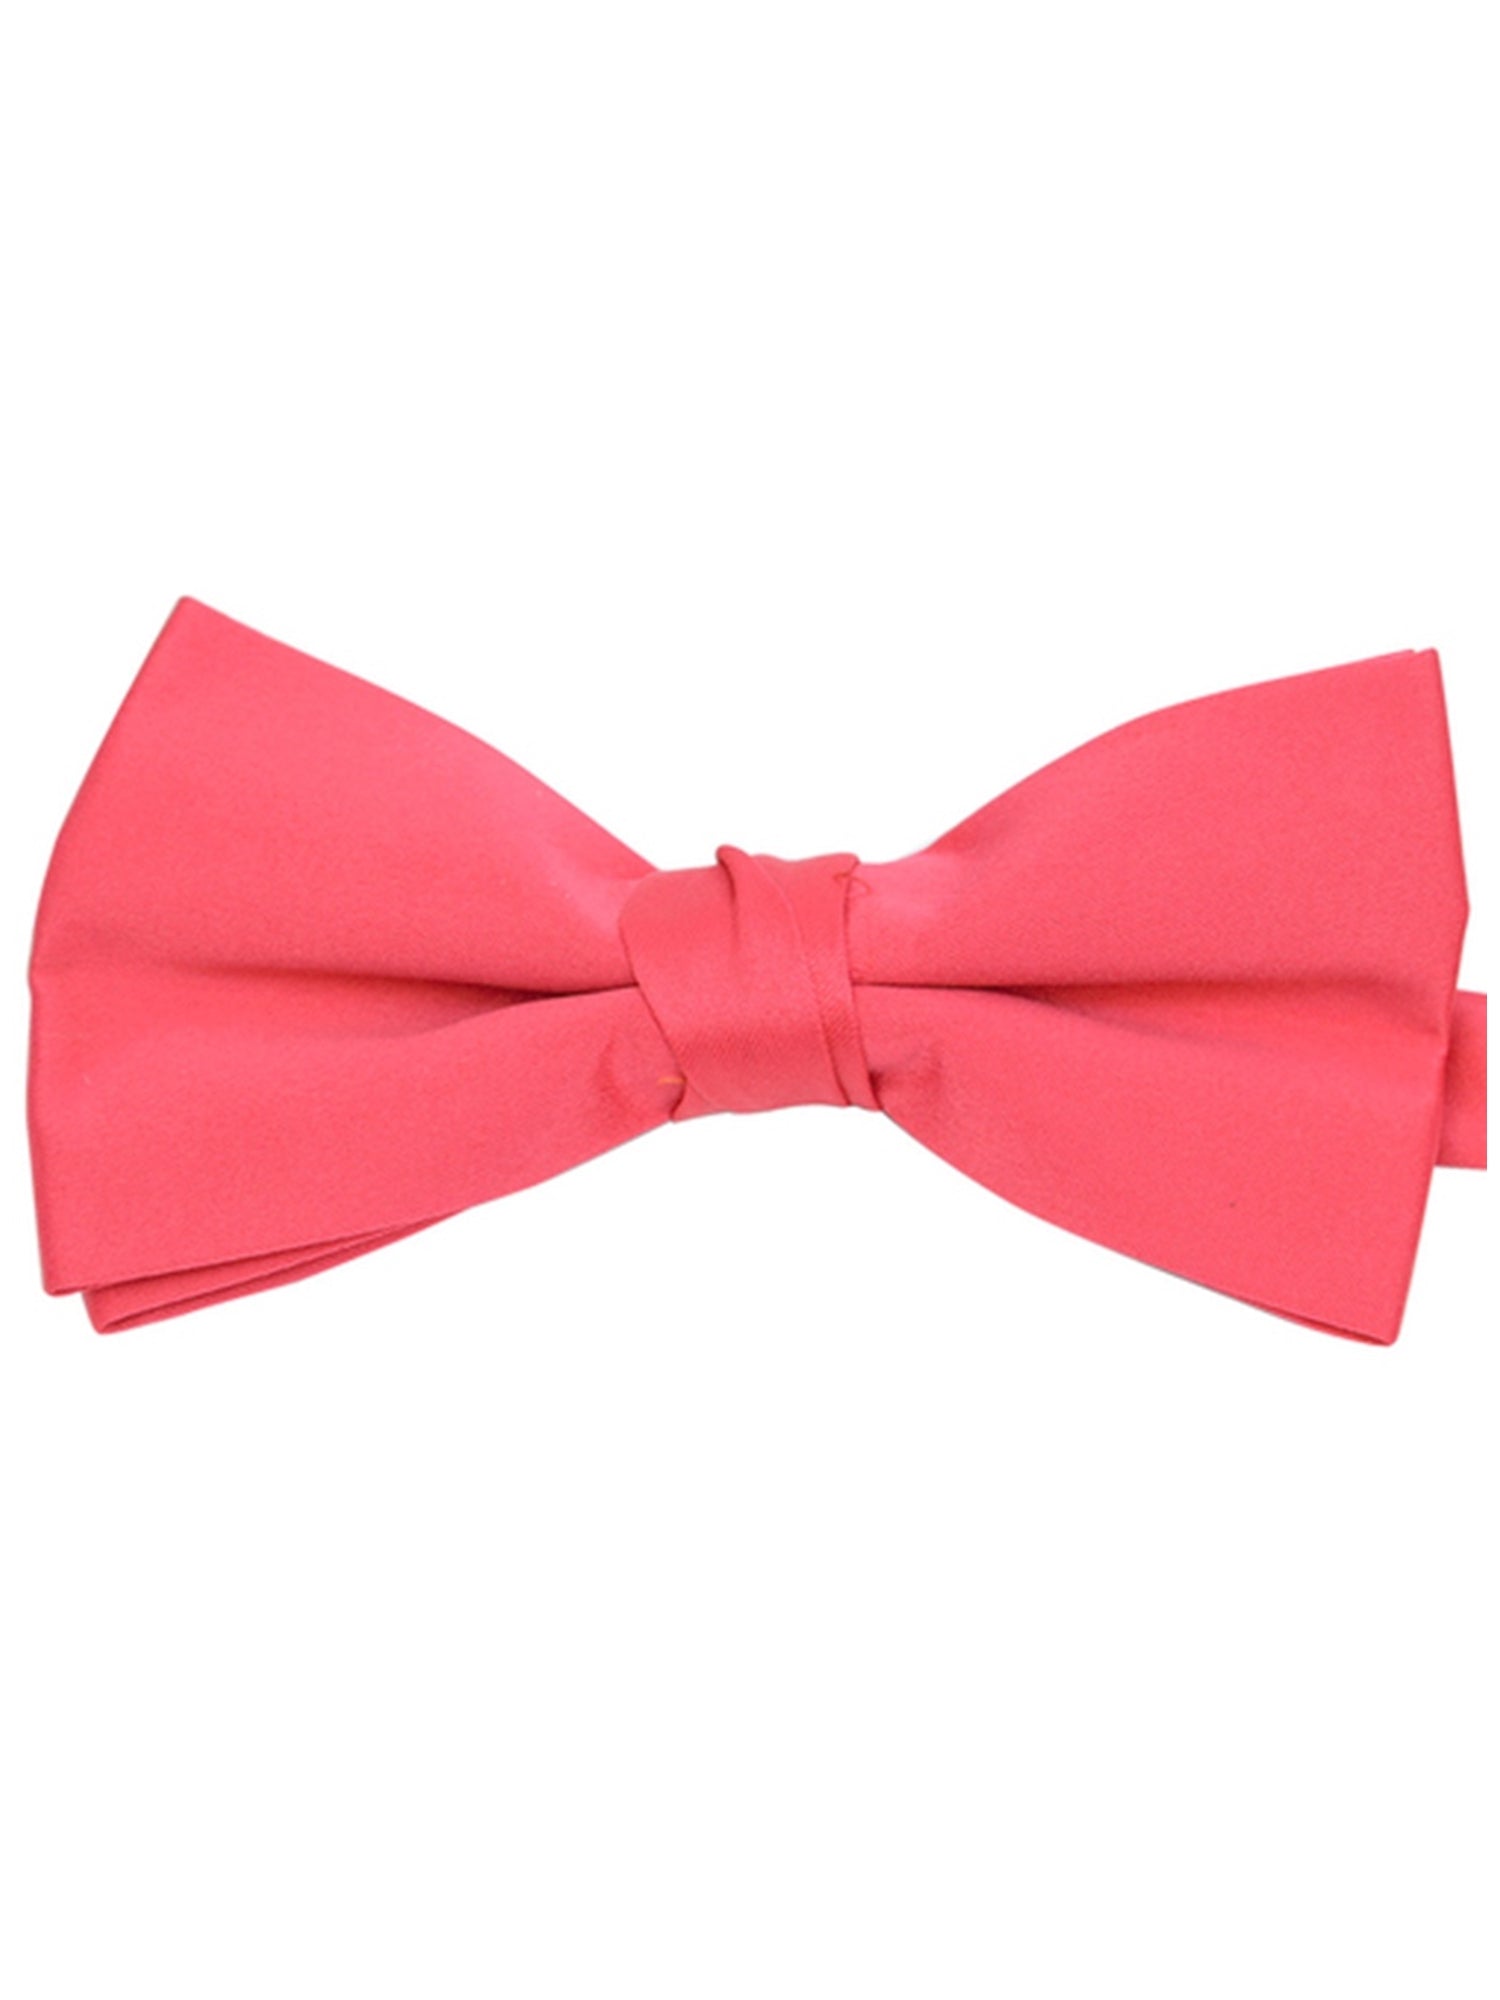 Young Boy's Pre-tied Adjustable Length Bow Tie - Formal Tuxedo Solid Color Boy's Solid Color Bow Tie TheDapperTie Neon Pink One Size 